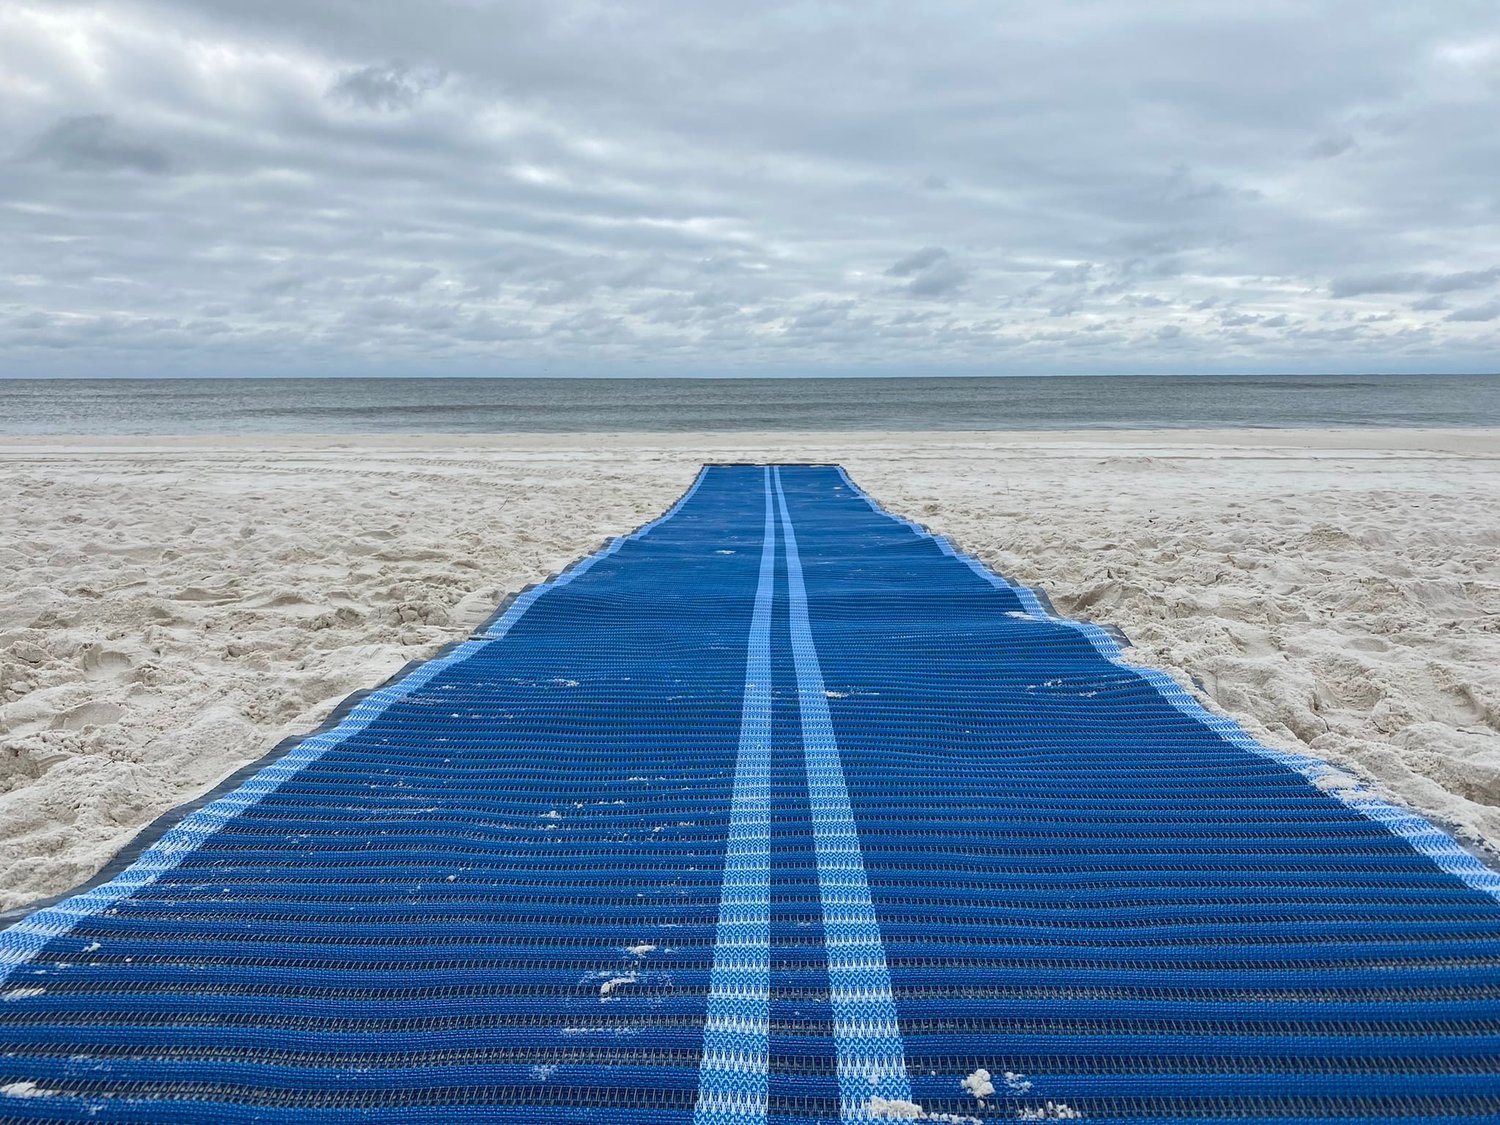 This week, Gulf State Park deployed a Mobi-Mar ADA Beach Access Mat at the west boardwalk. The mat stretches 200 feet from the end of the boardwalk ending just 50 feet from the Gulf of Mexico.